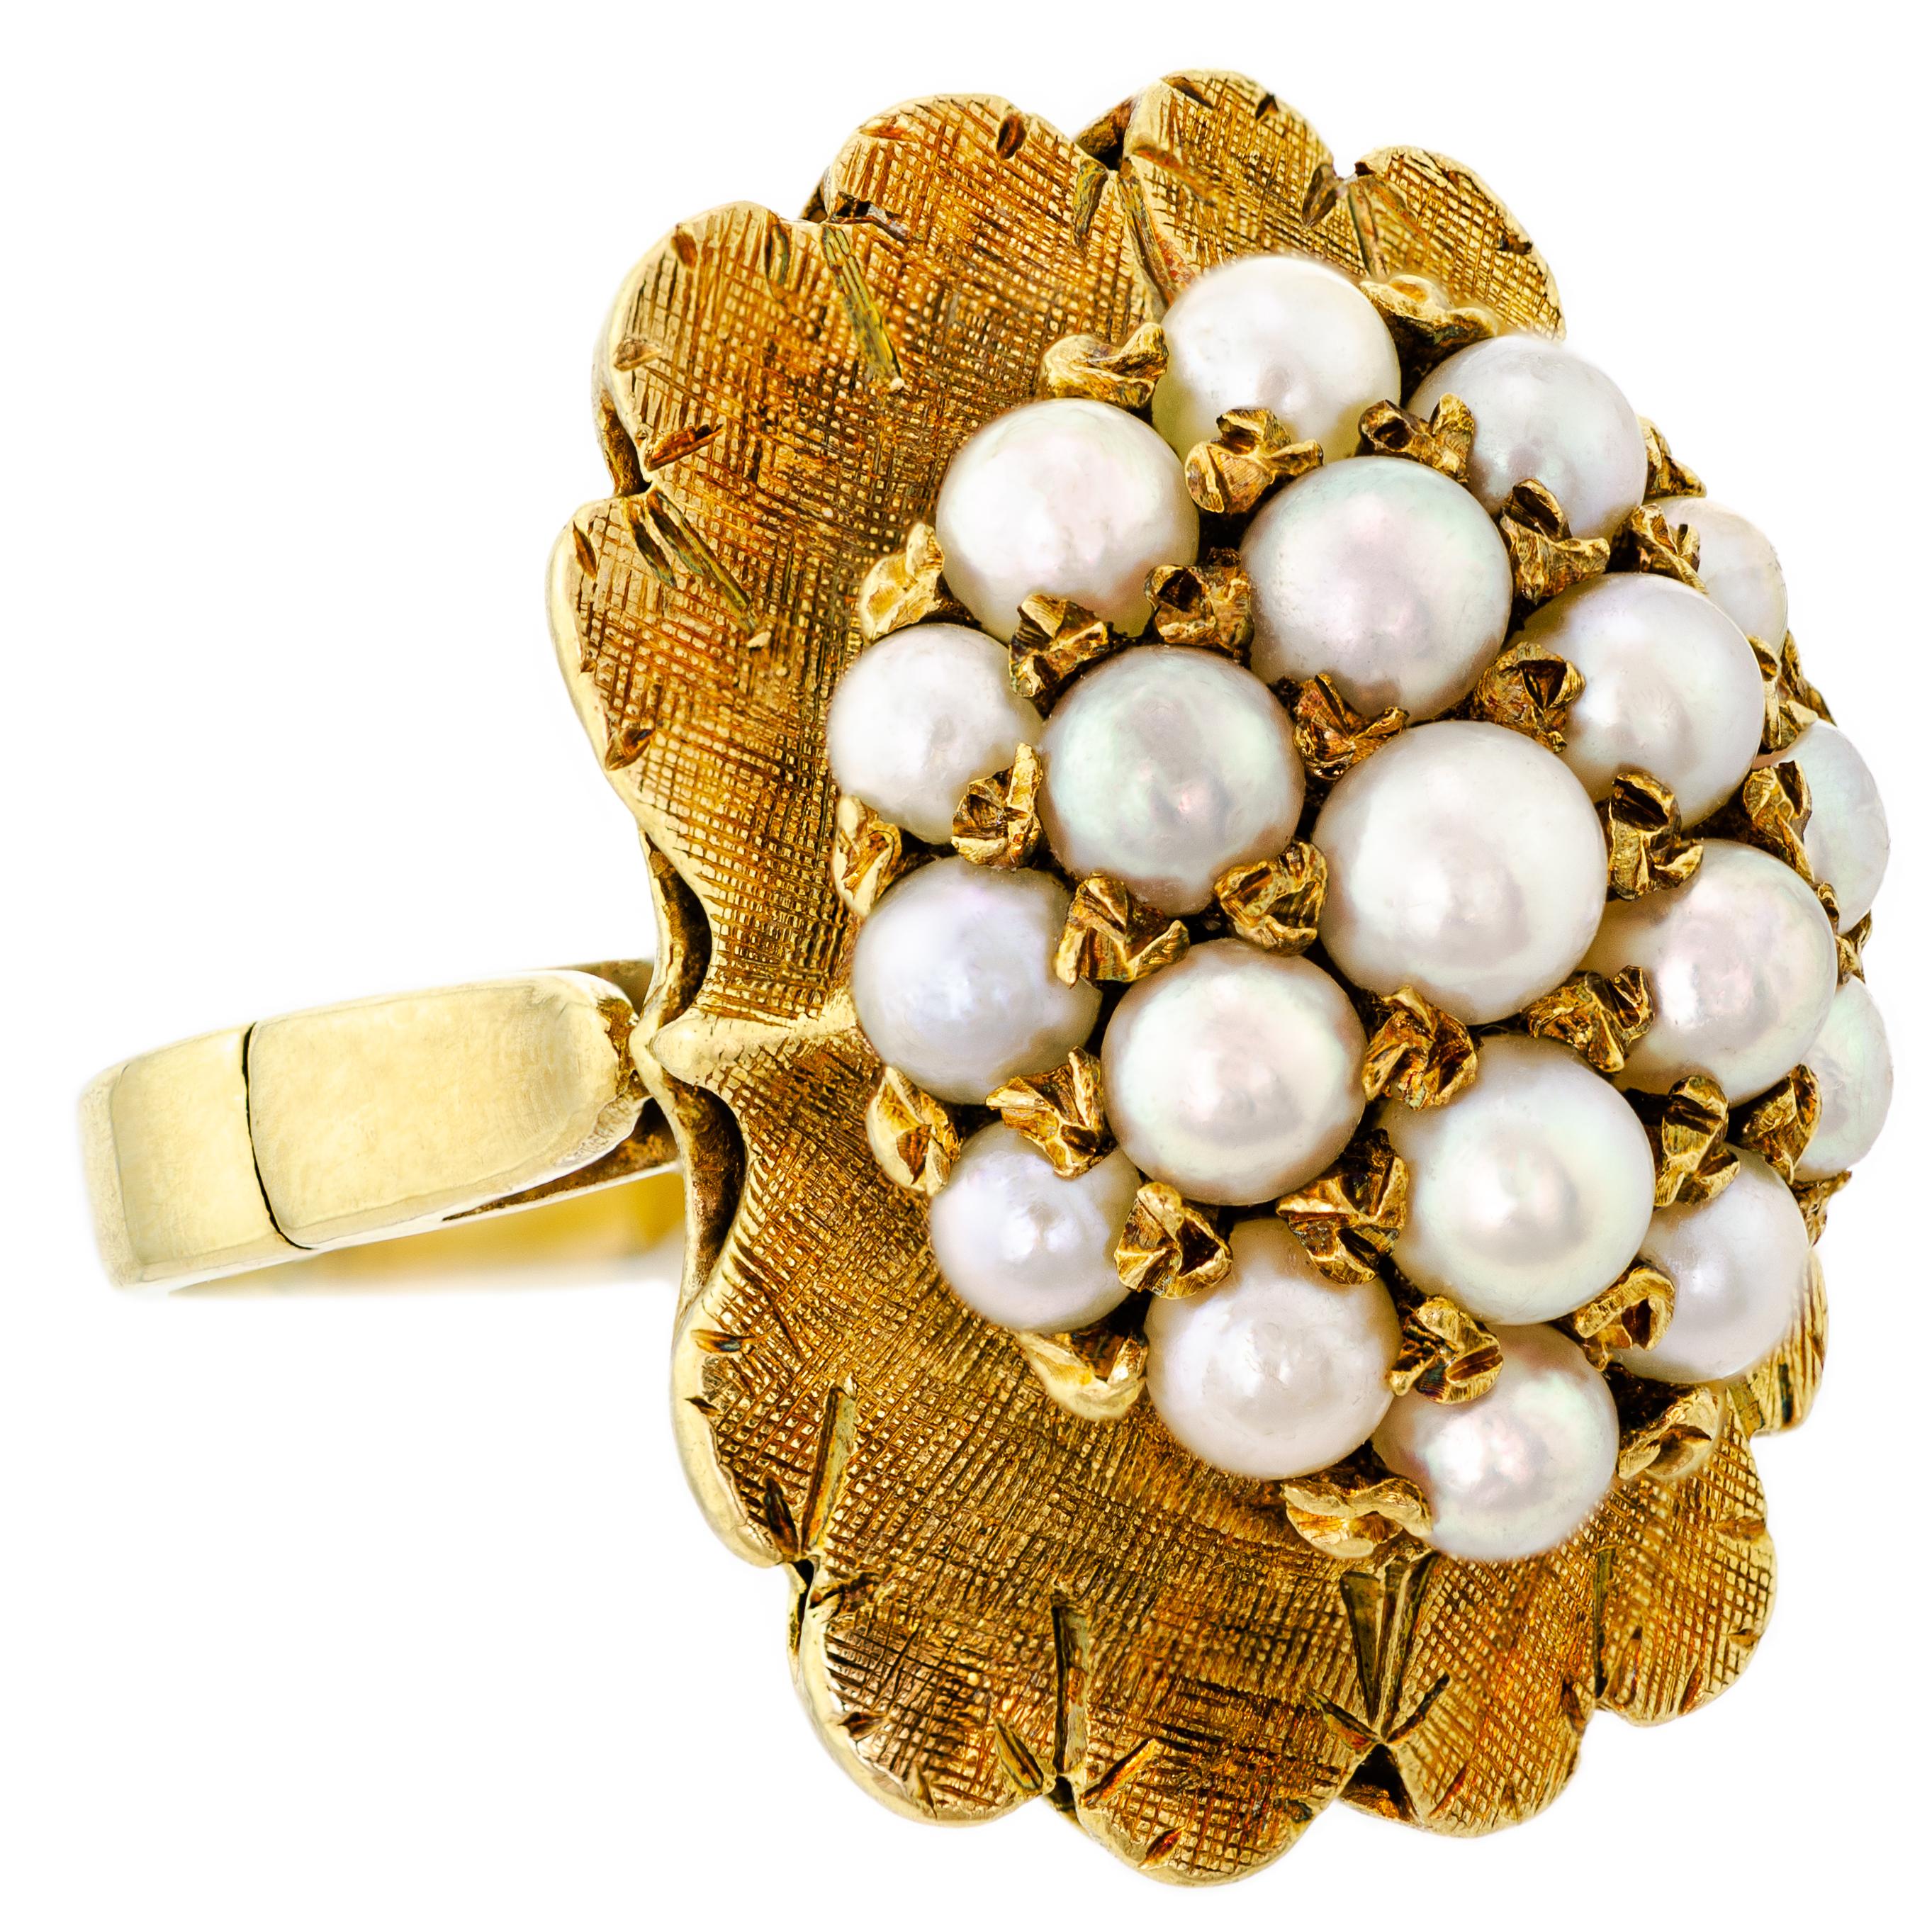 This stunning ring is a true representation of Retro-inspired fashion from the 1940s. It features a meticulously crafted dome bombe style setting with a cluster of round cultured pearls prong set in the center. The ring is made of 14kt yellow gold,